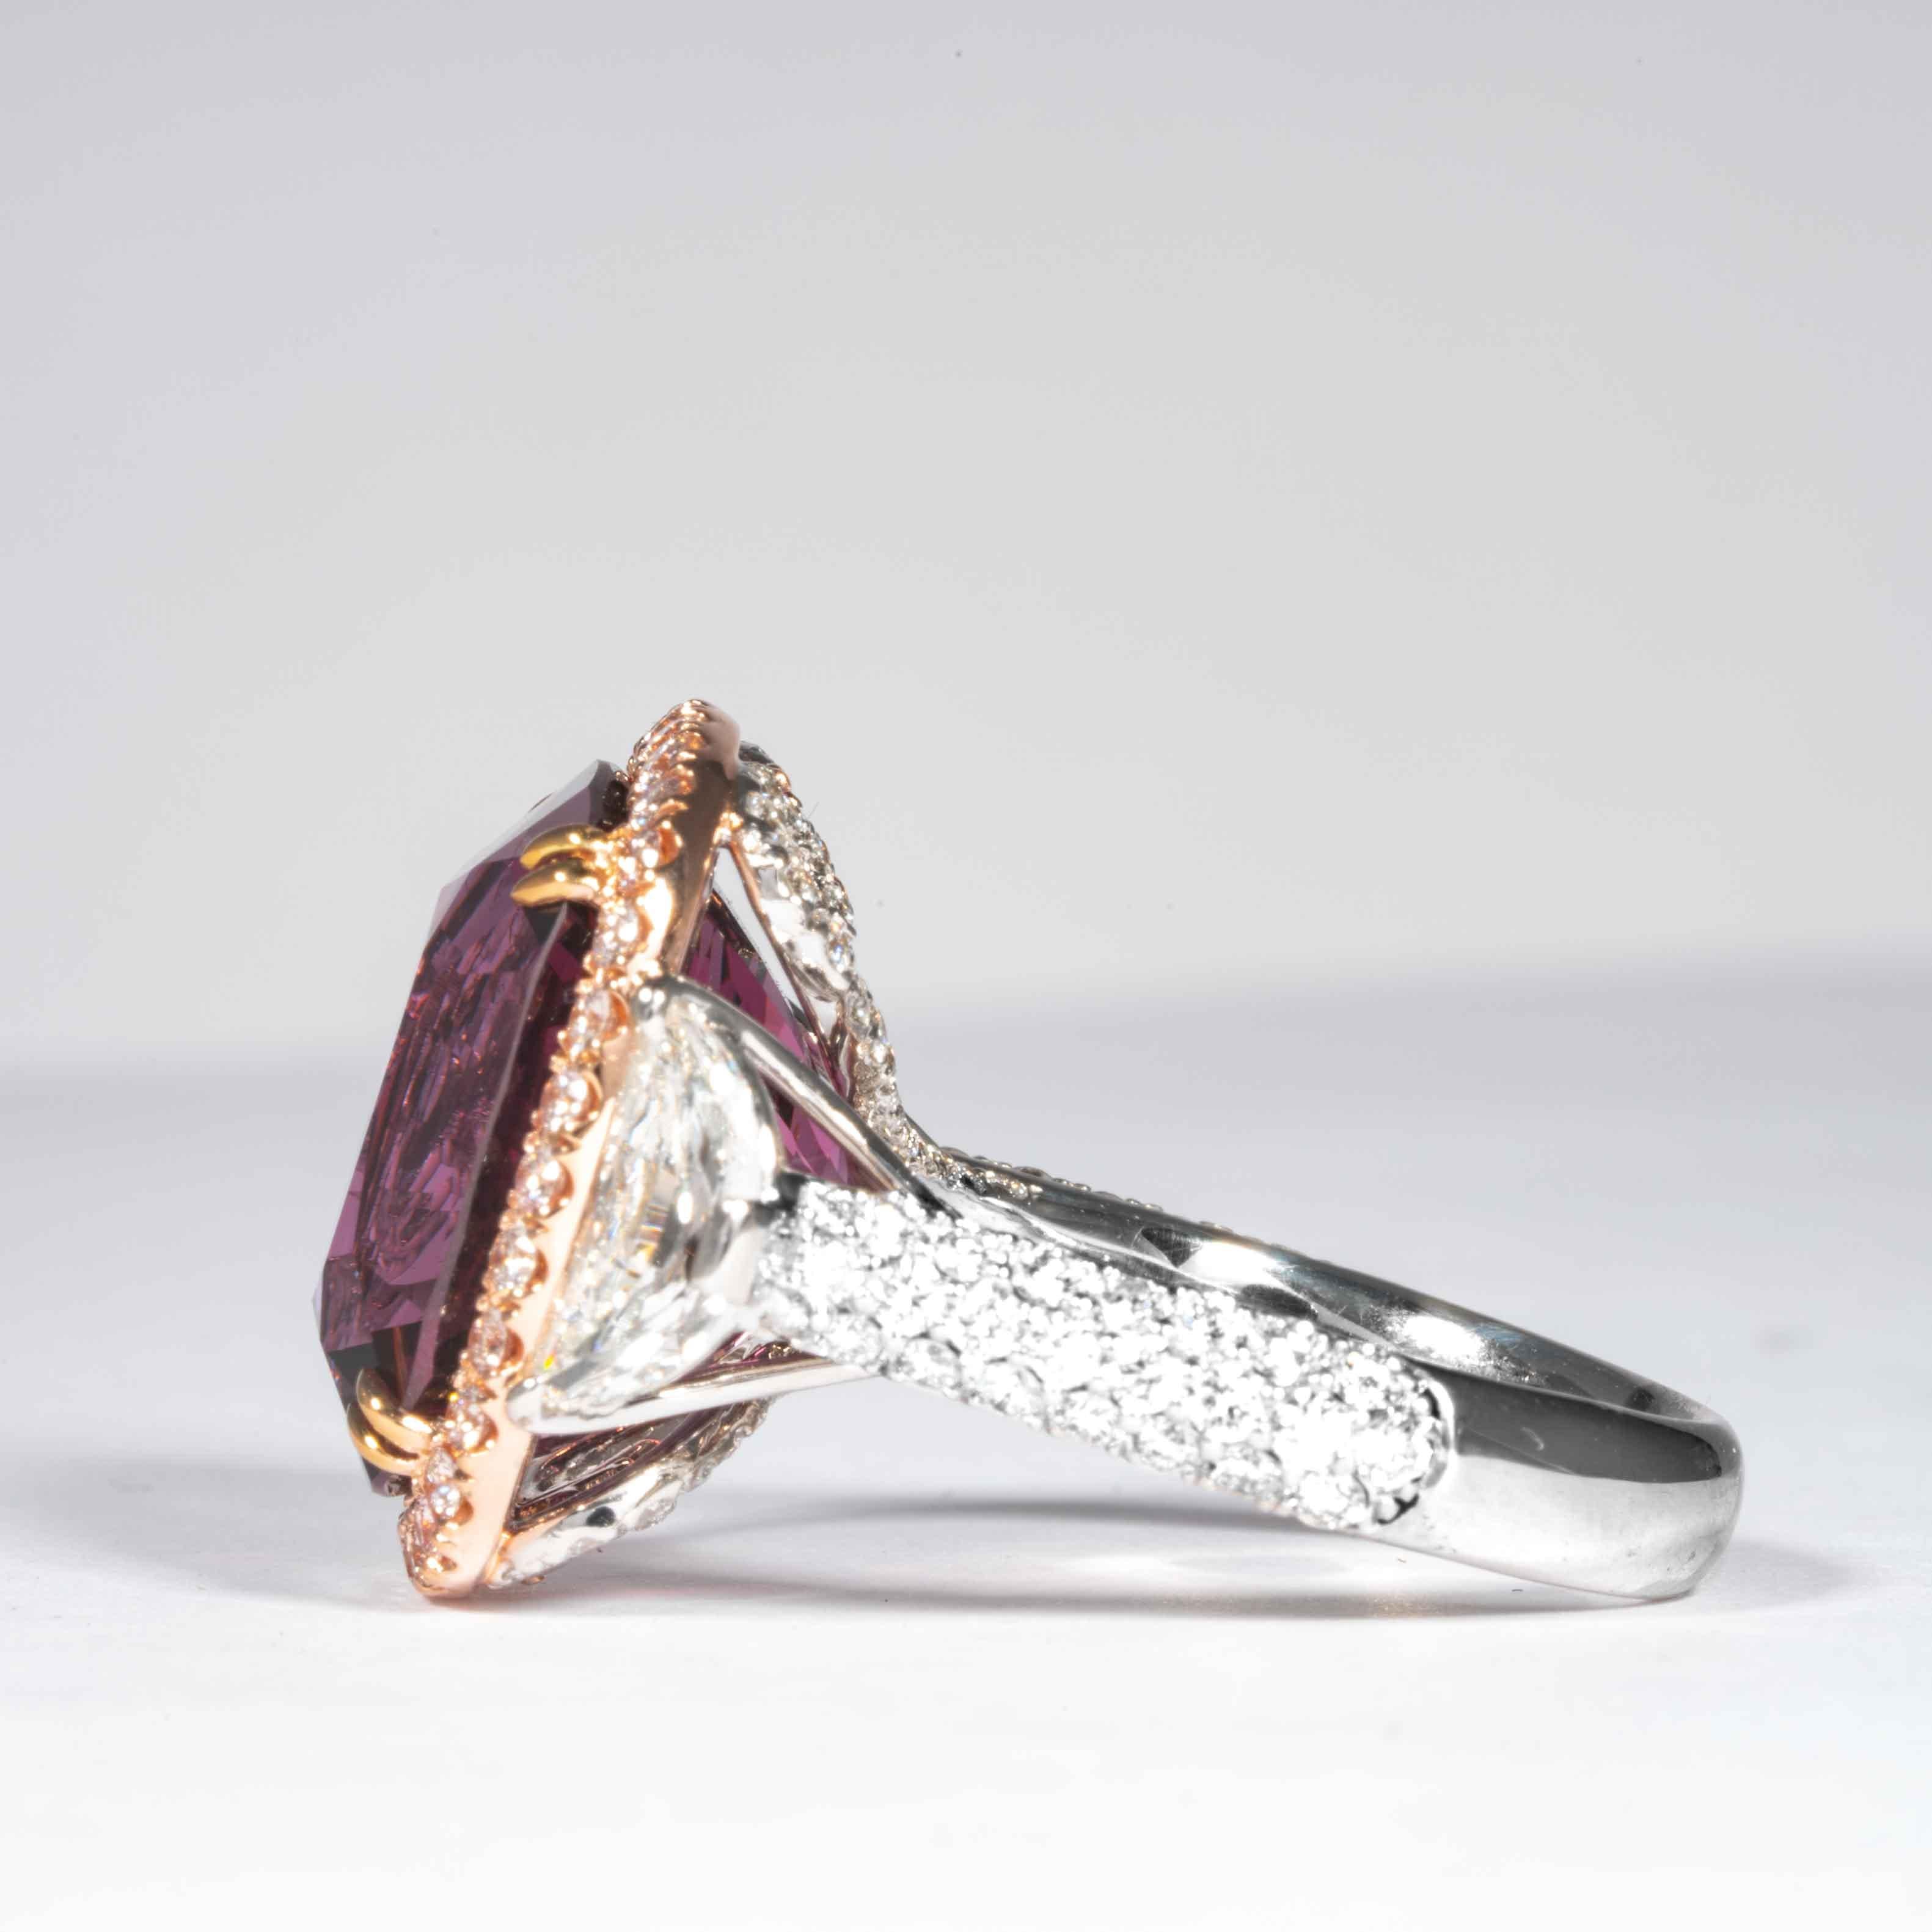 Women's Shreve, Crump & Low 15.38 Carat Burmese Pink Spinel and Diamond Ring 'Dungaire'